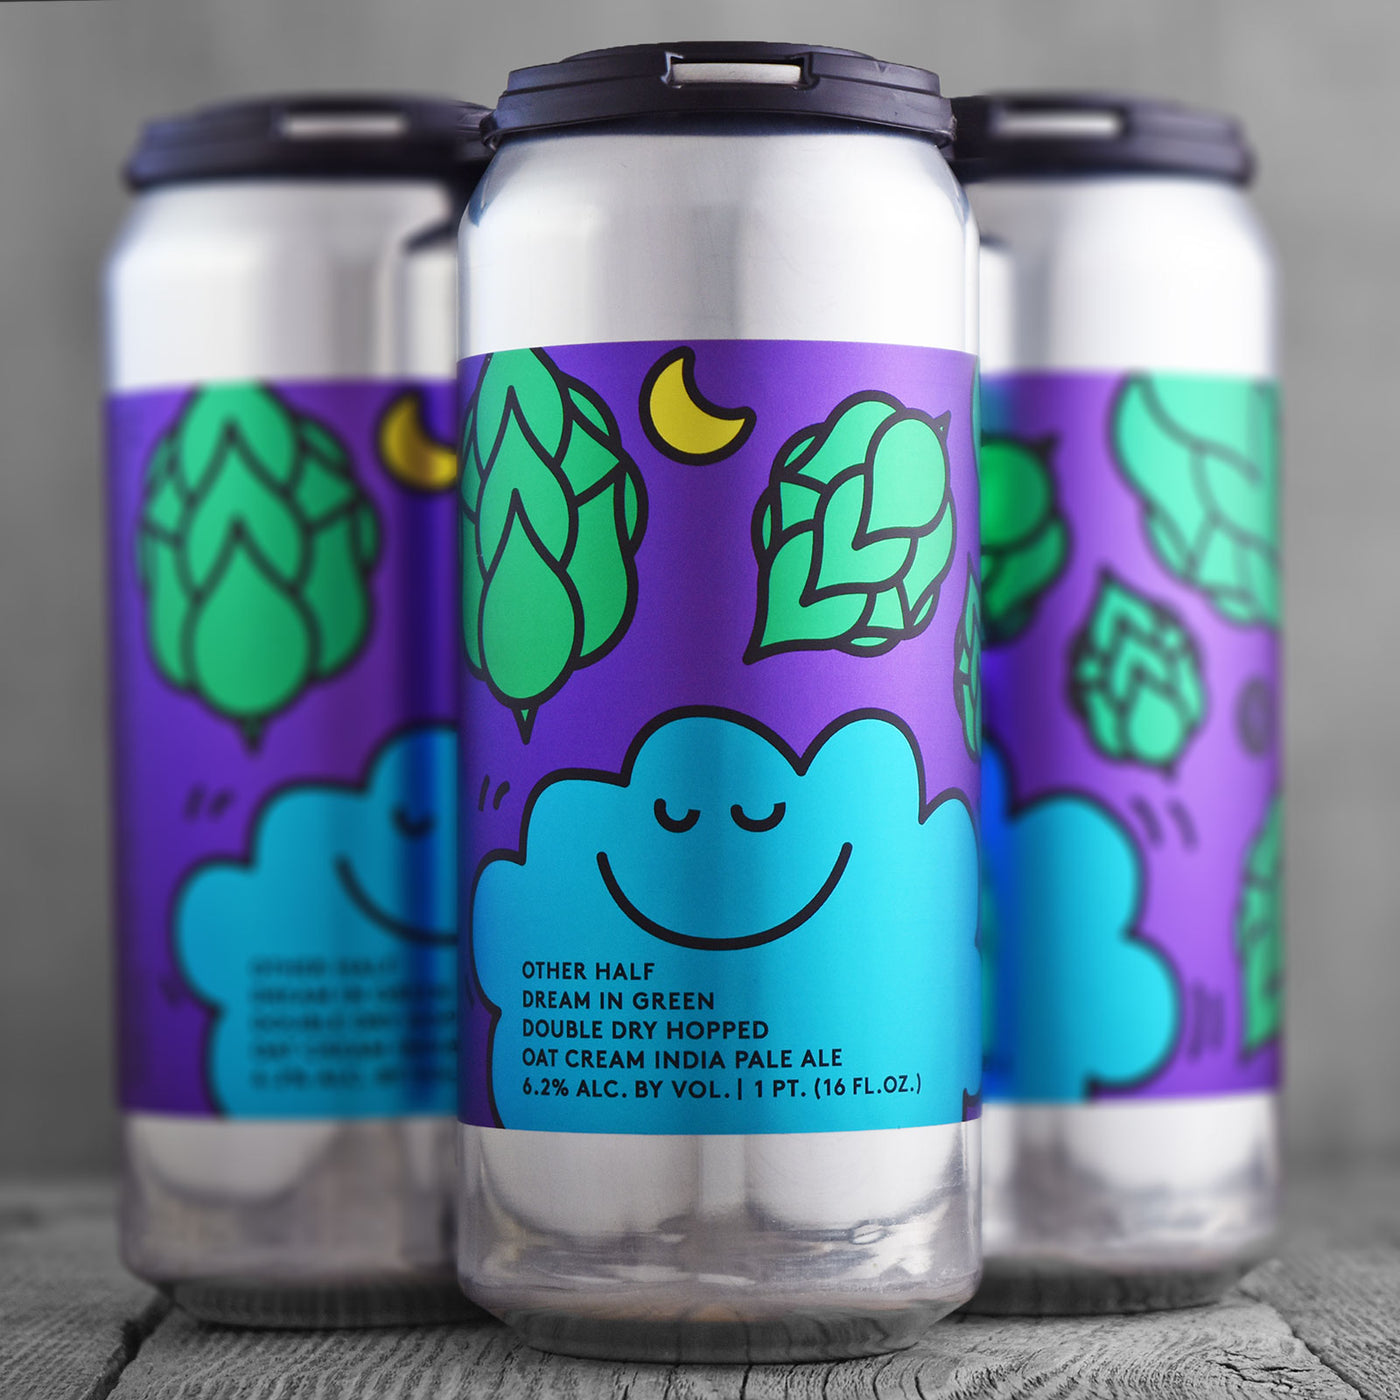 Other Half DDH Dream In Green - Limit 2